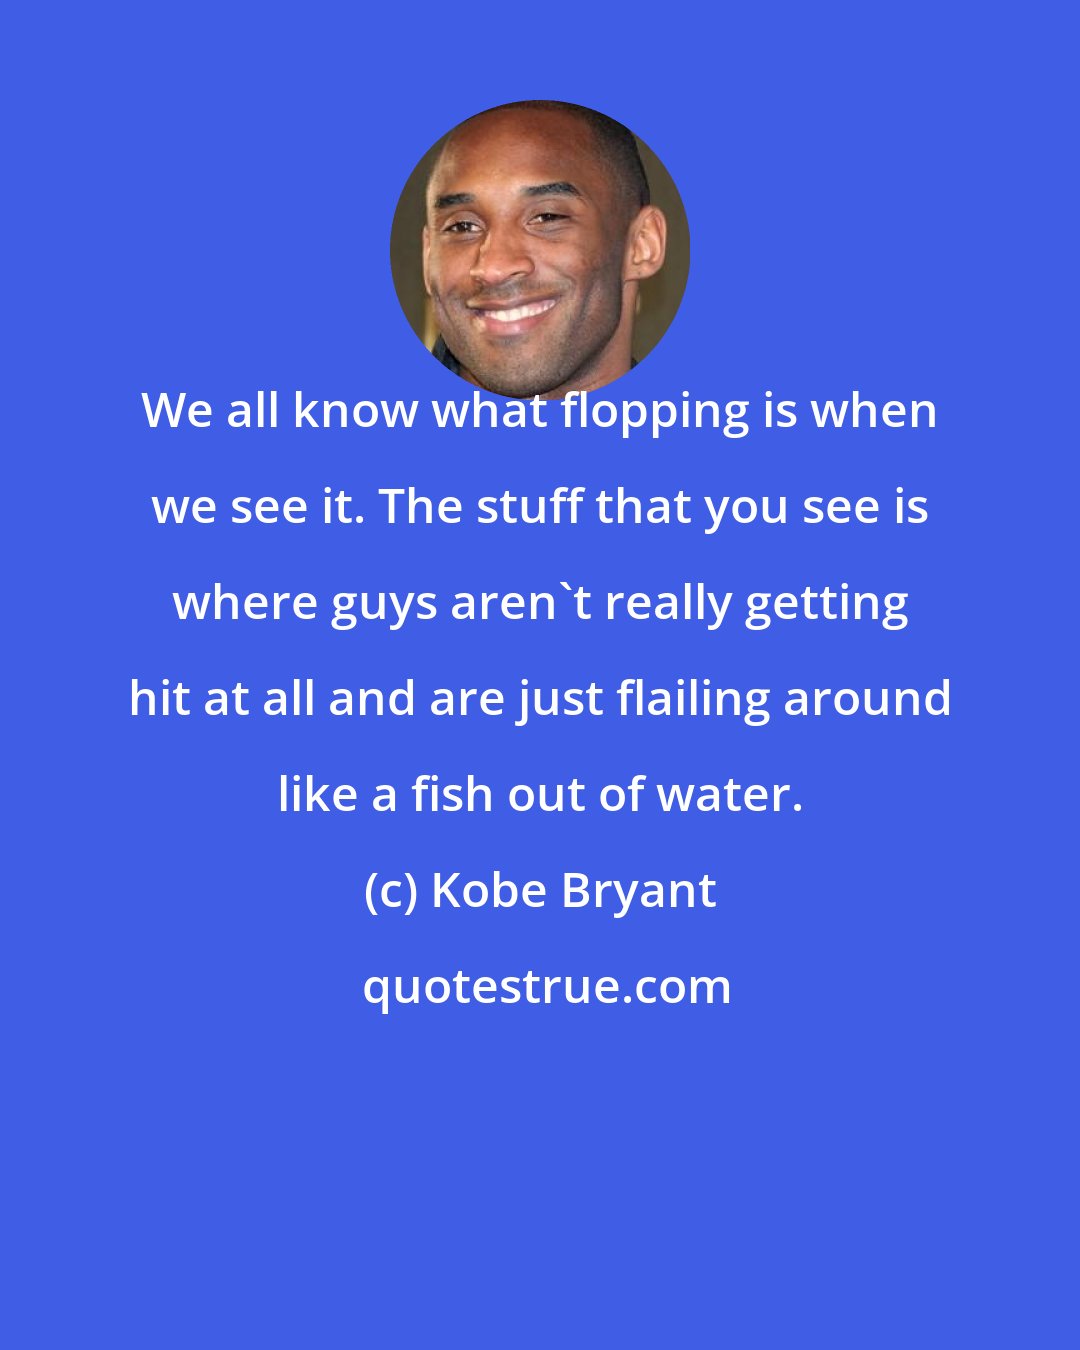 Kobe Bryant: We all know what flopping is when we see it. The stuff that you see is where guys aren't really getting hit at all and are just flailing around like a fish out of water.